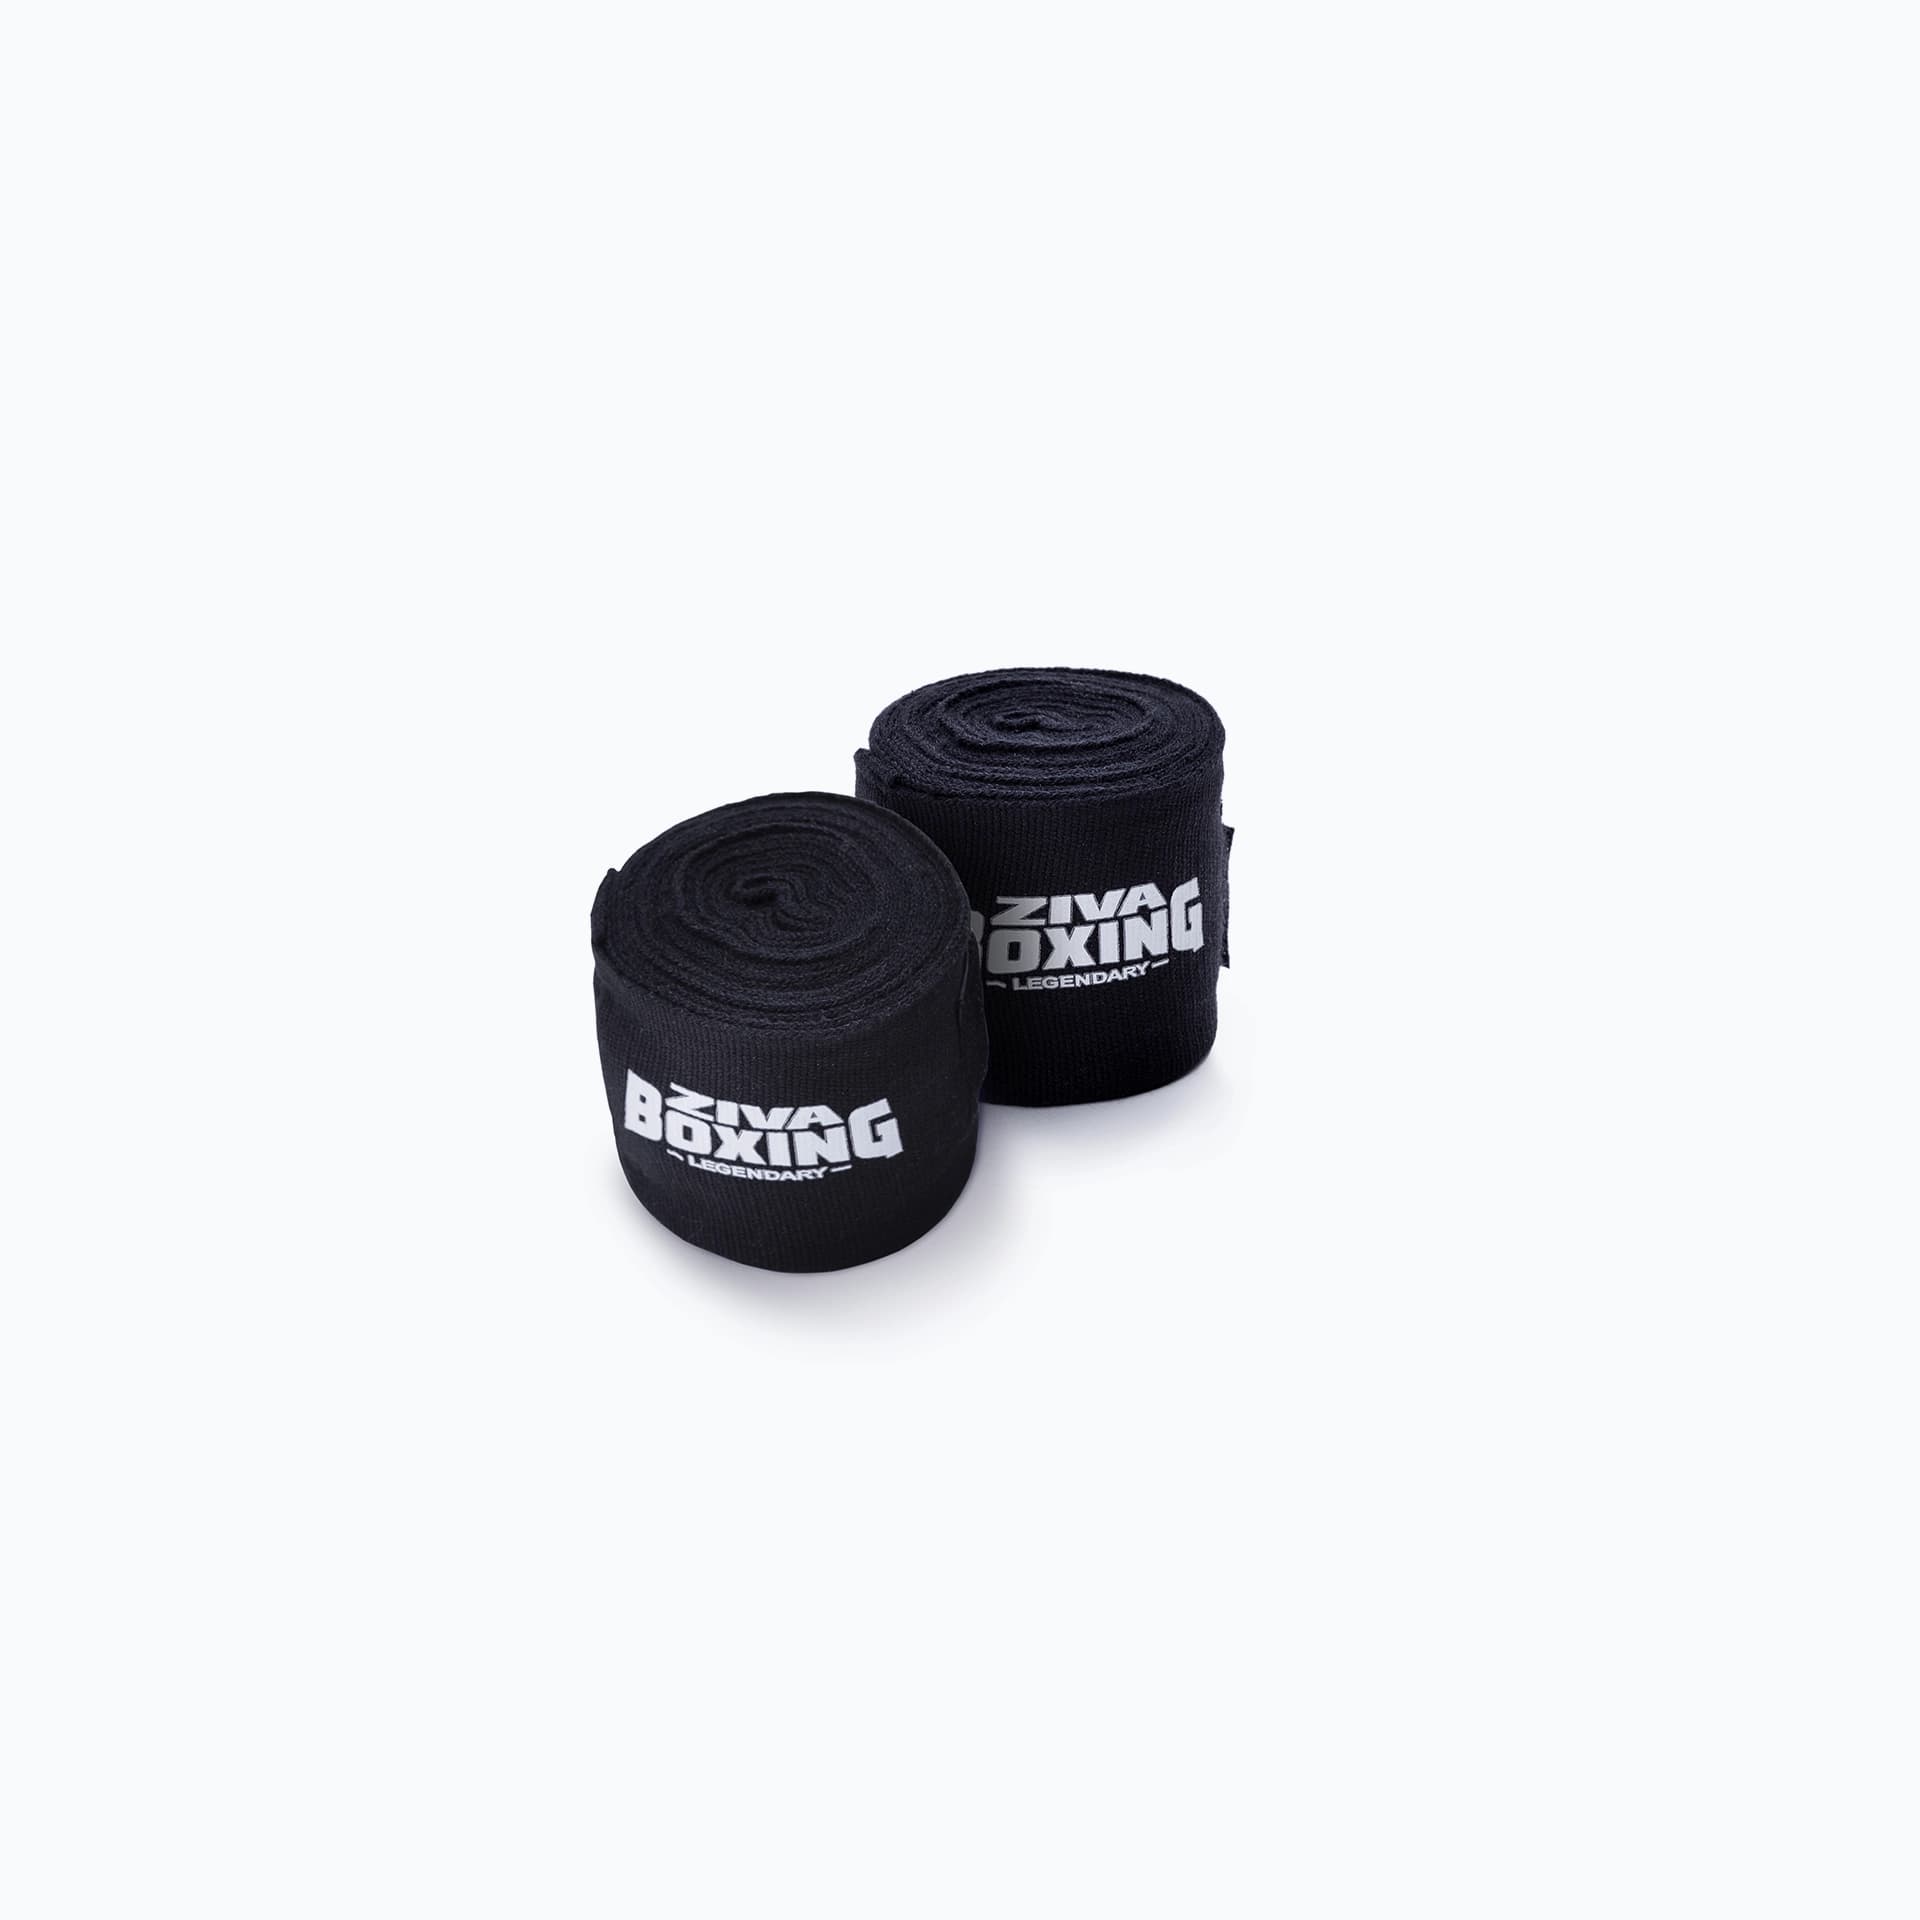 PERFORMANCE BOXING HAND WRAPS